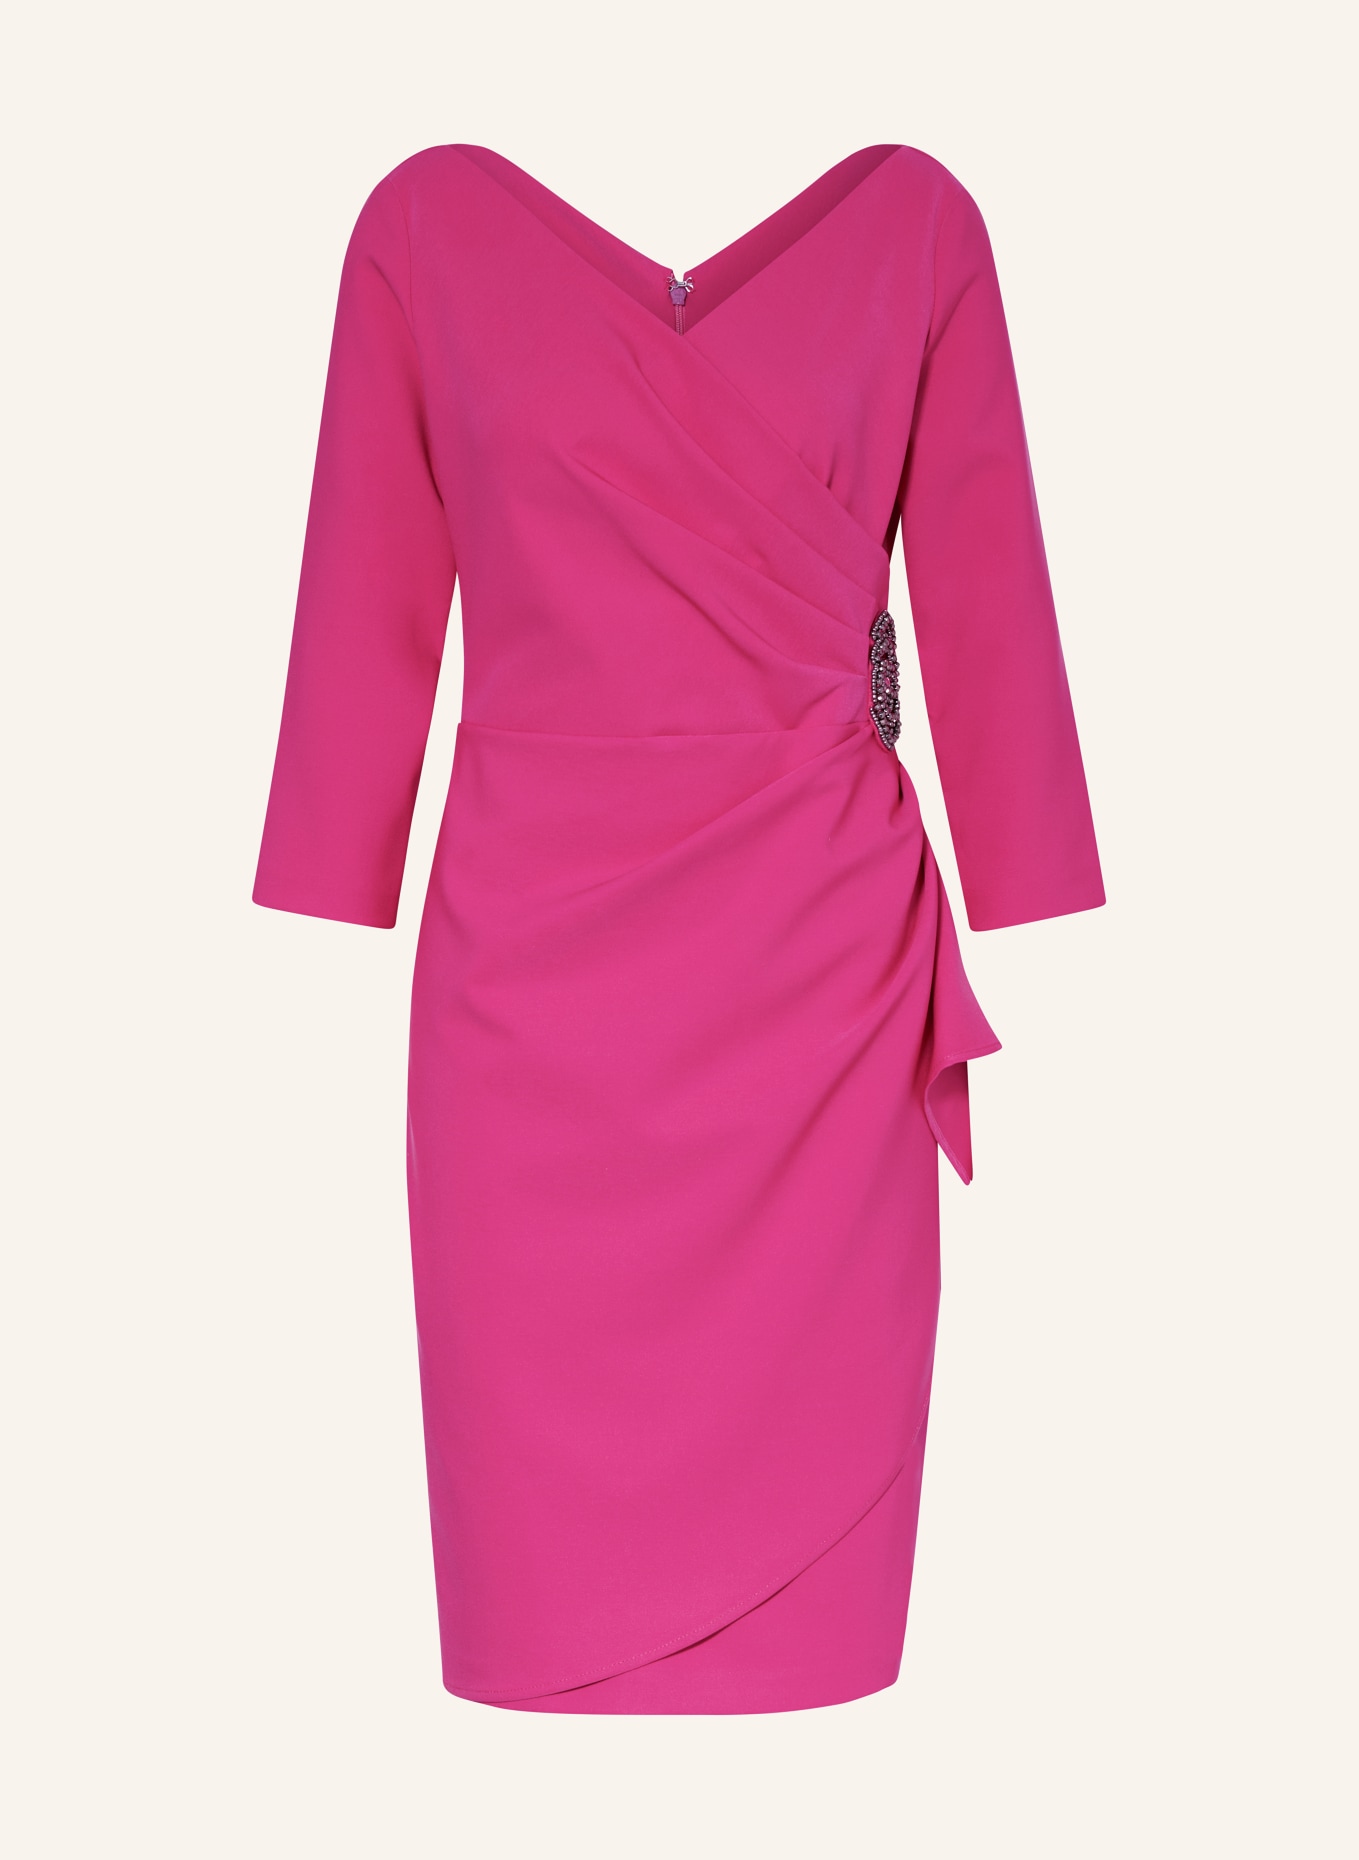 Joseph Ribkoff SIGNATURE Cocktail dress with 3/4 sleeves, Color: PINK (Image 1)